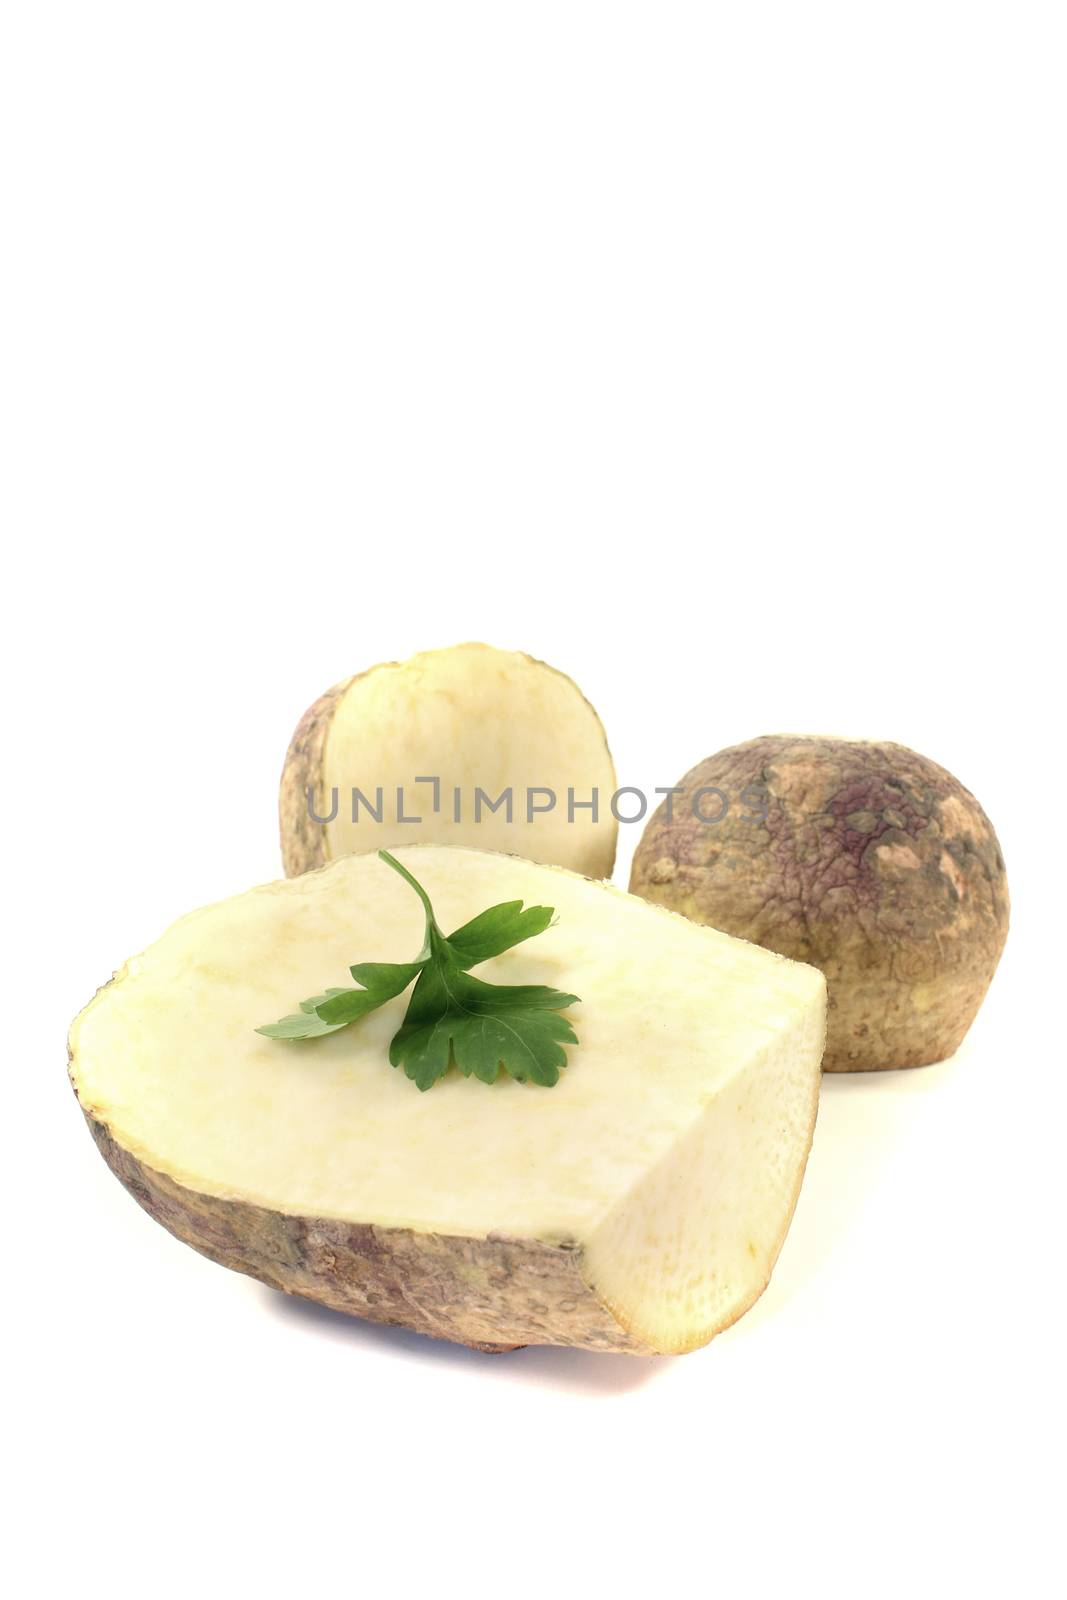 yellow rutabaga with parsley on a bright background